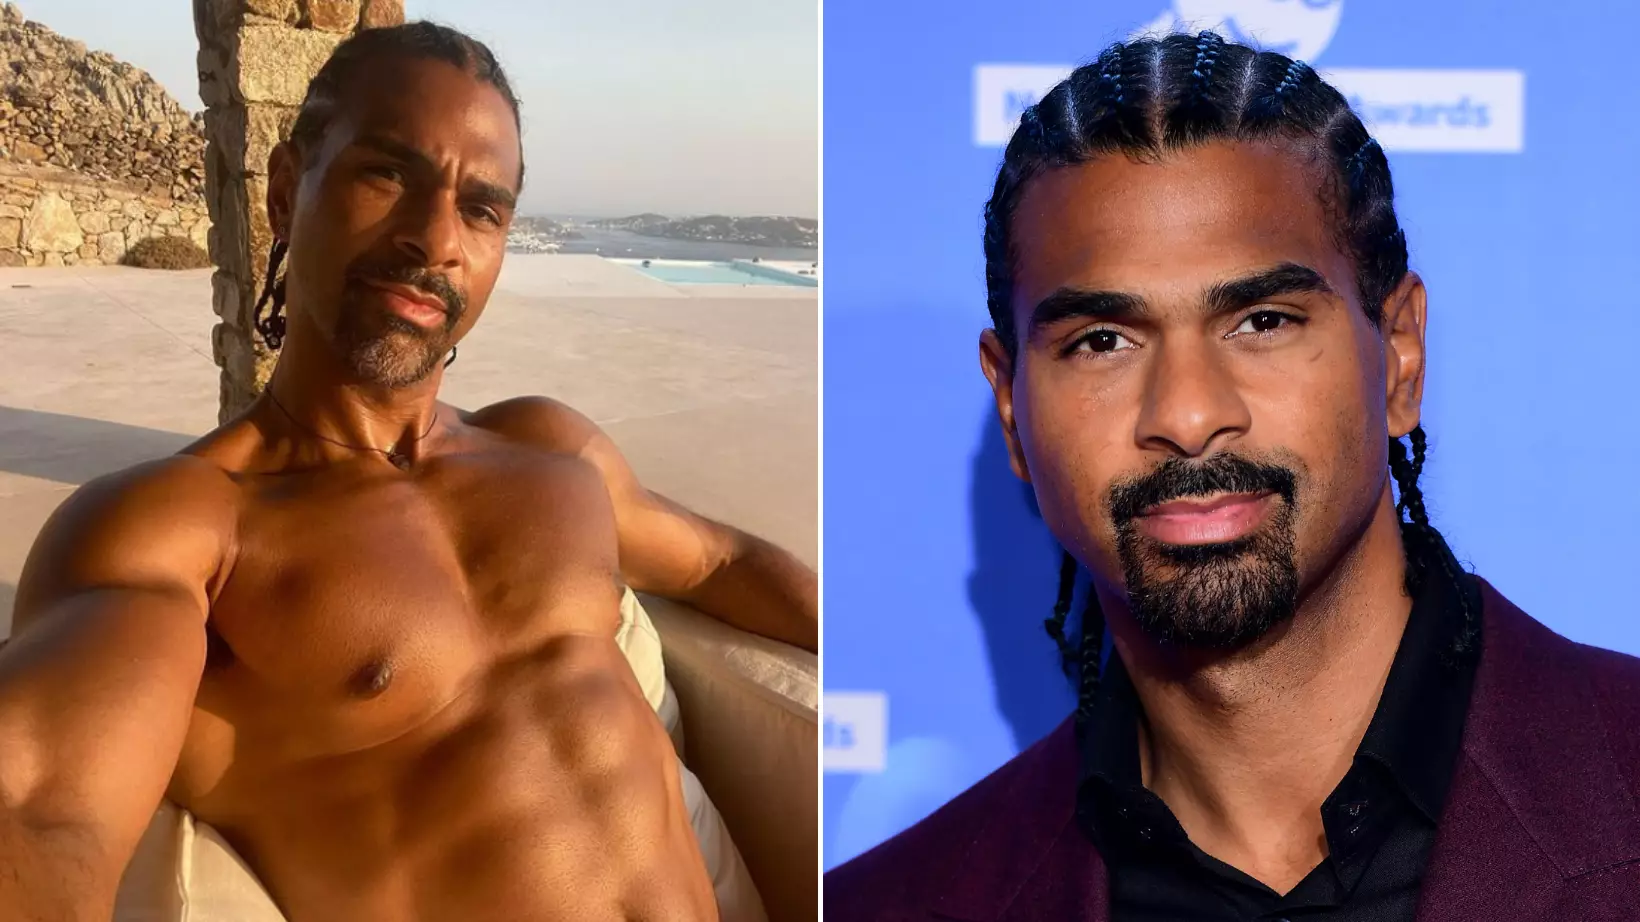 David Haye Announces Boxing Comeback At 40, His Opponent Is A Billionaire